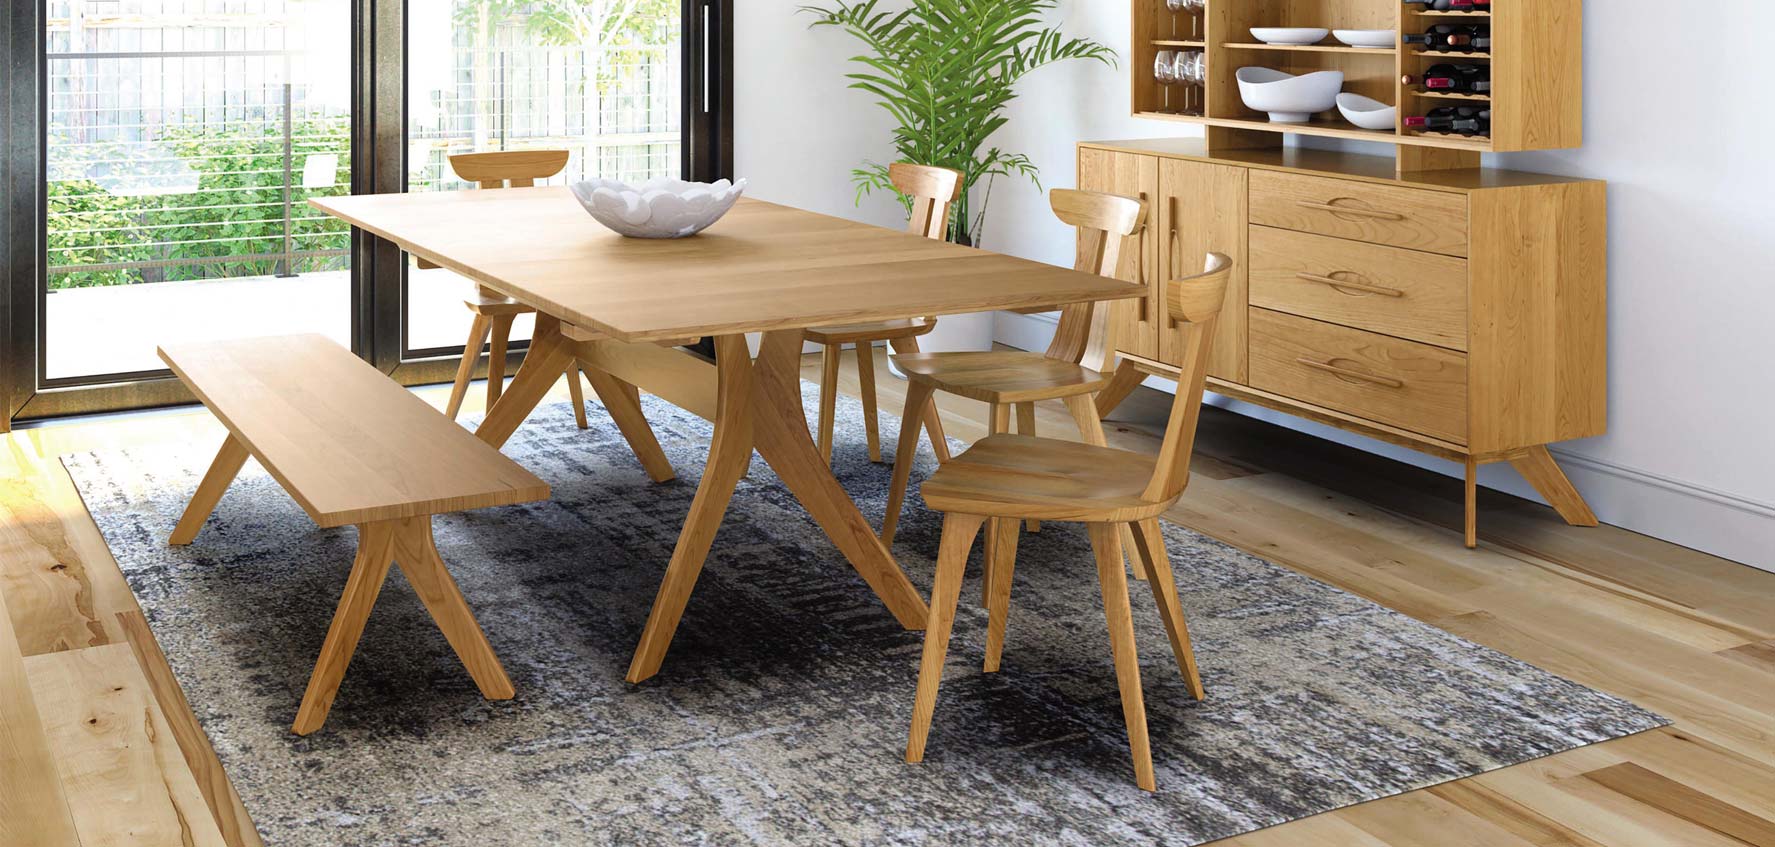 Copeland's Audrey Dining Table, Chairs, Bench | Made in America